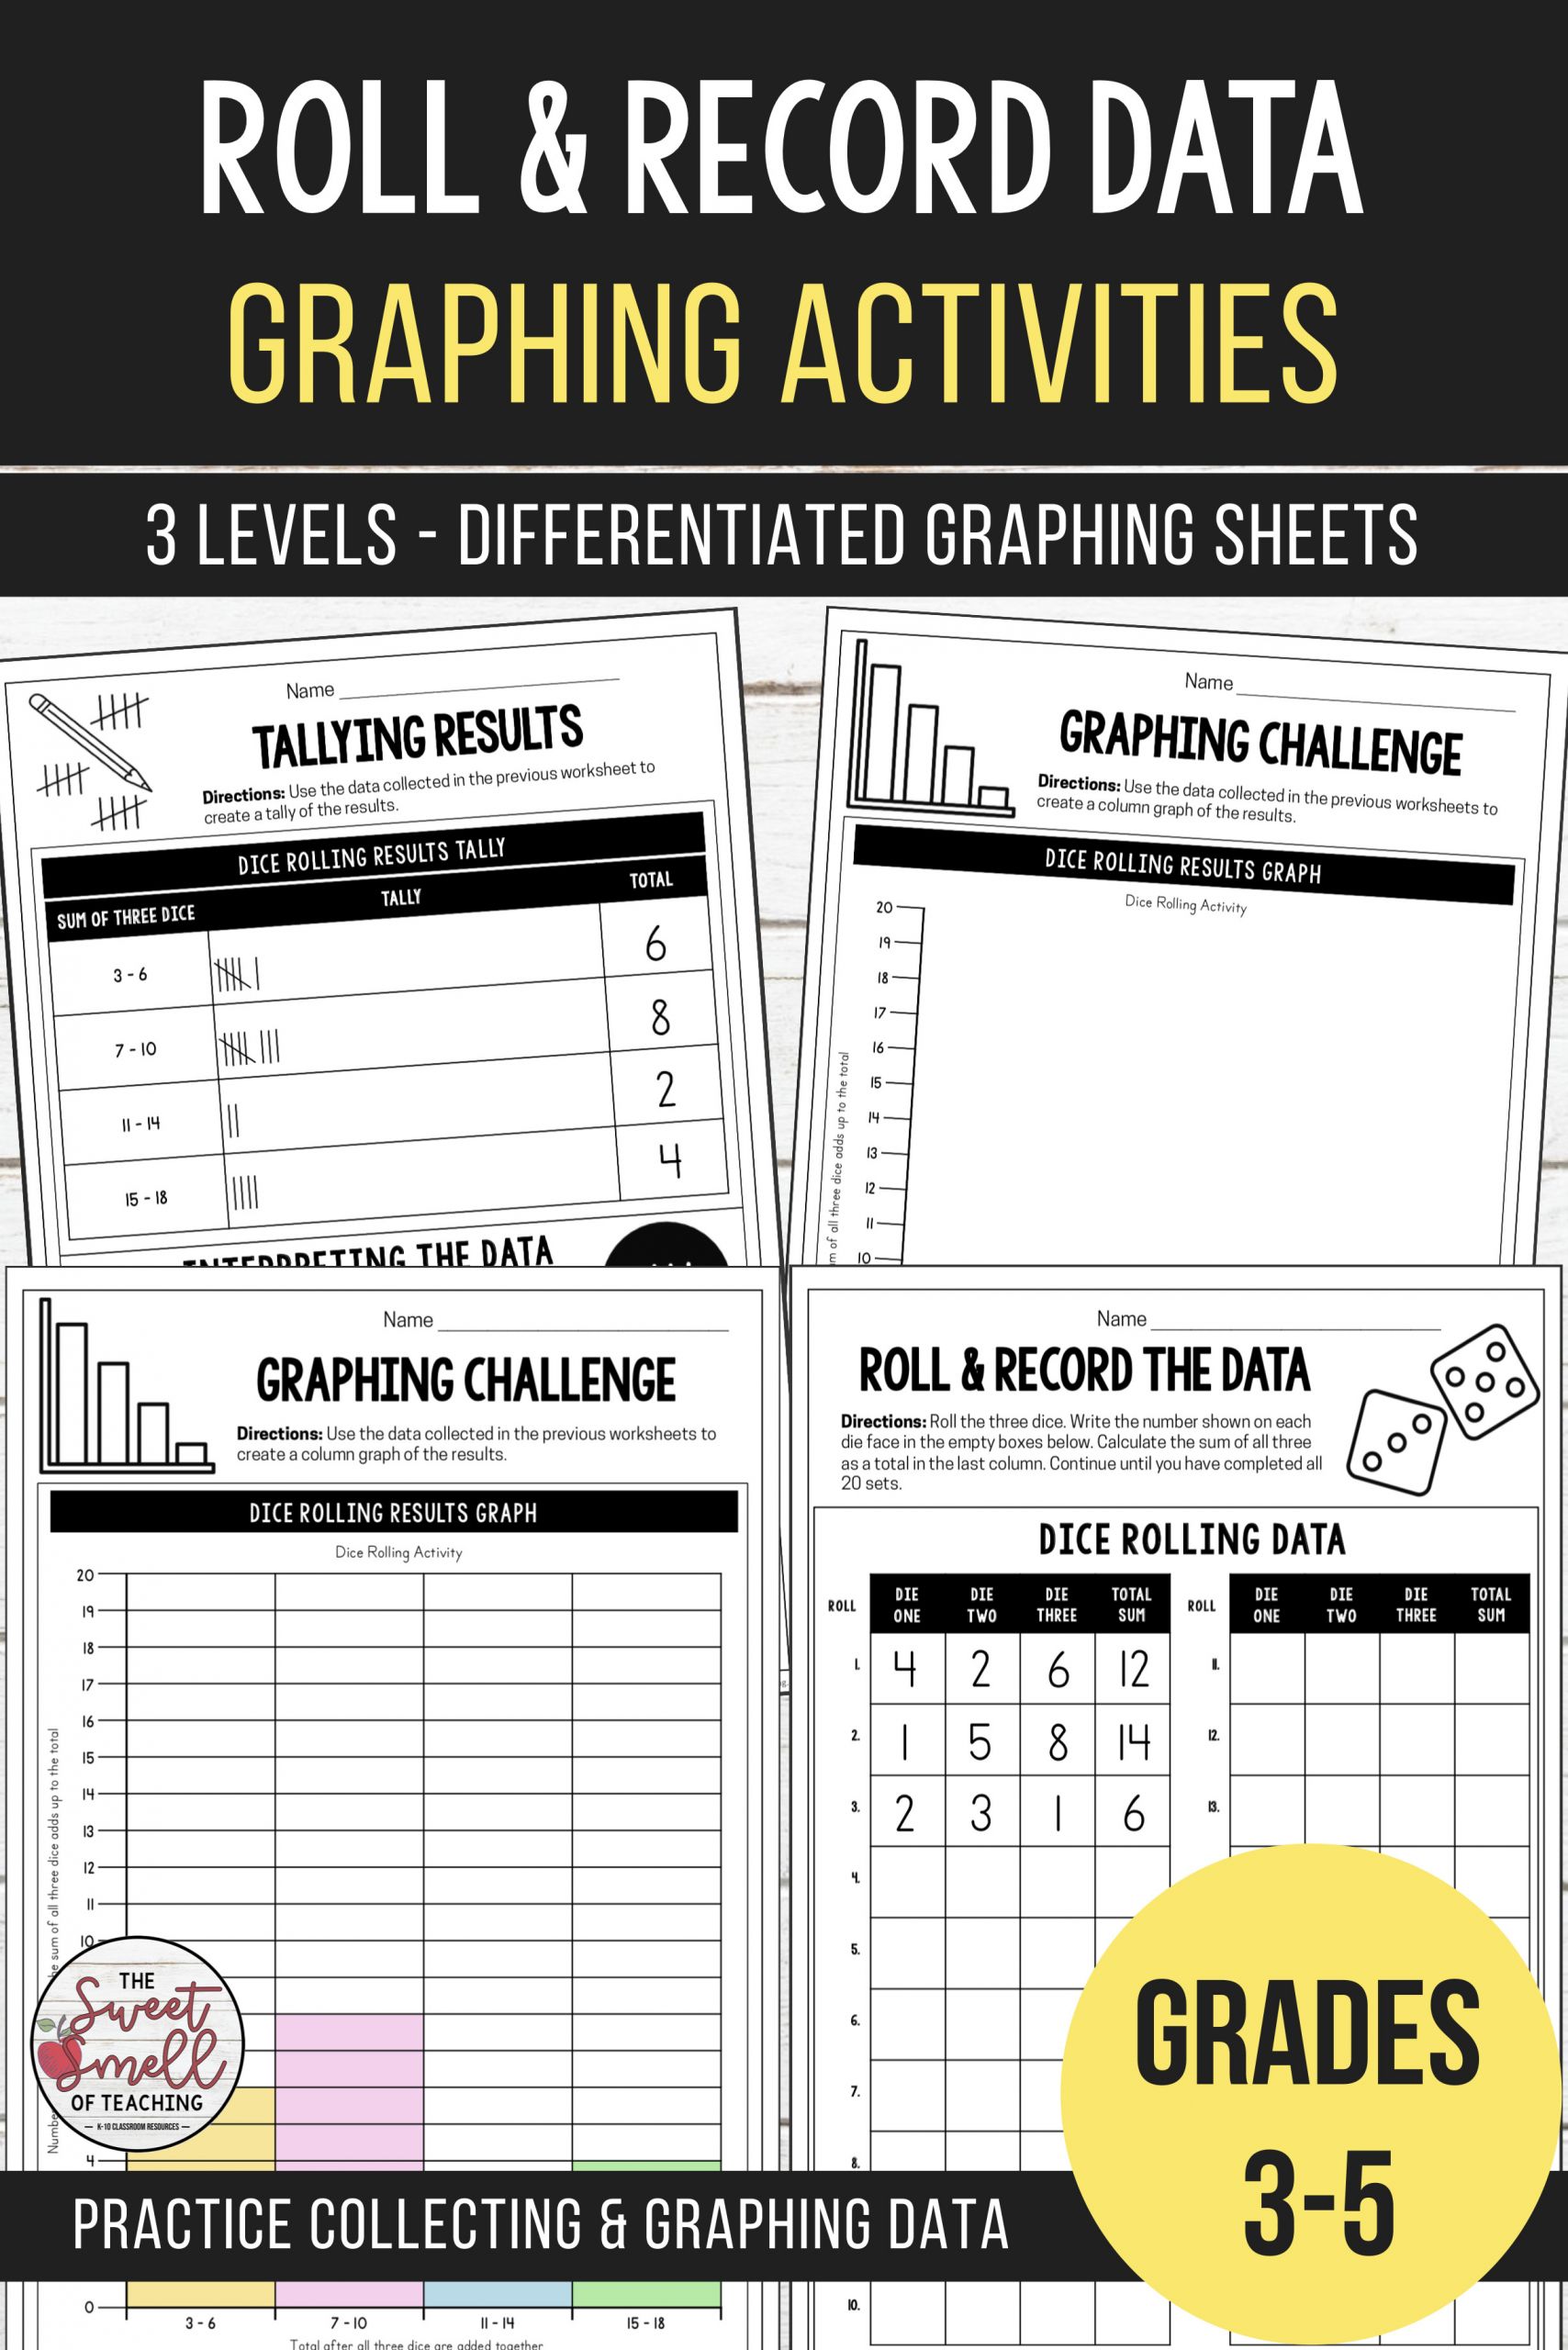 Free Math Worksheets Second Grade 2 Counting Money Counting Money Pennies Nickels Dimes Quarters 10 Coins